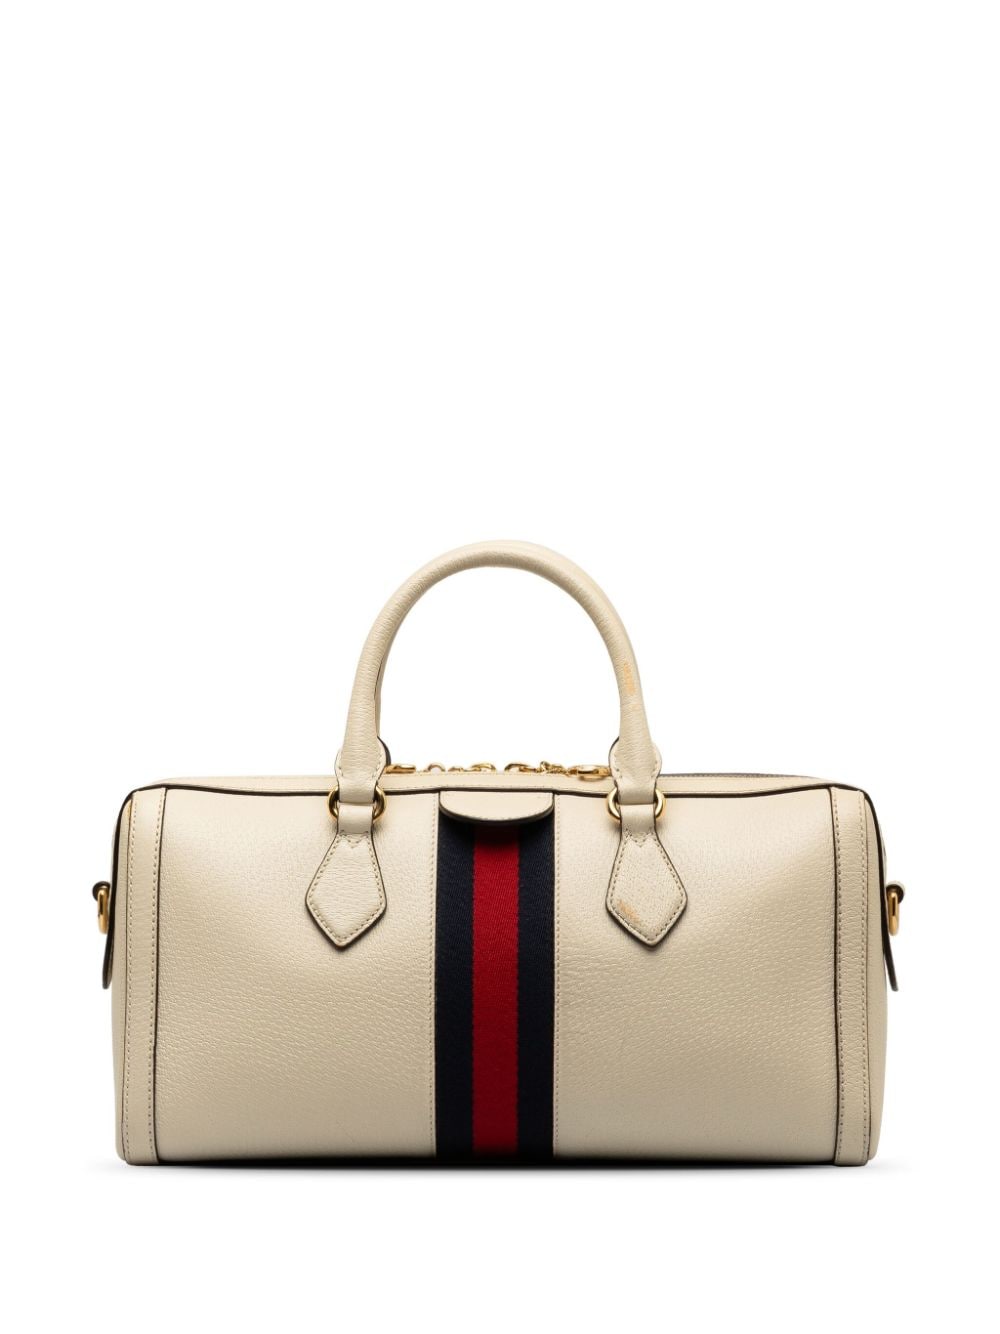 Pre-owned Gucci Ophidia 两用手提包（2000-2015年典藏款） In White